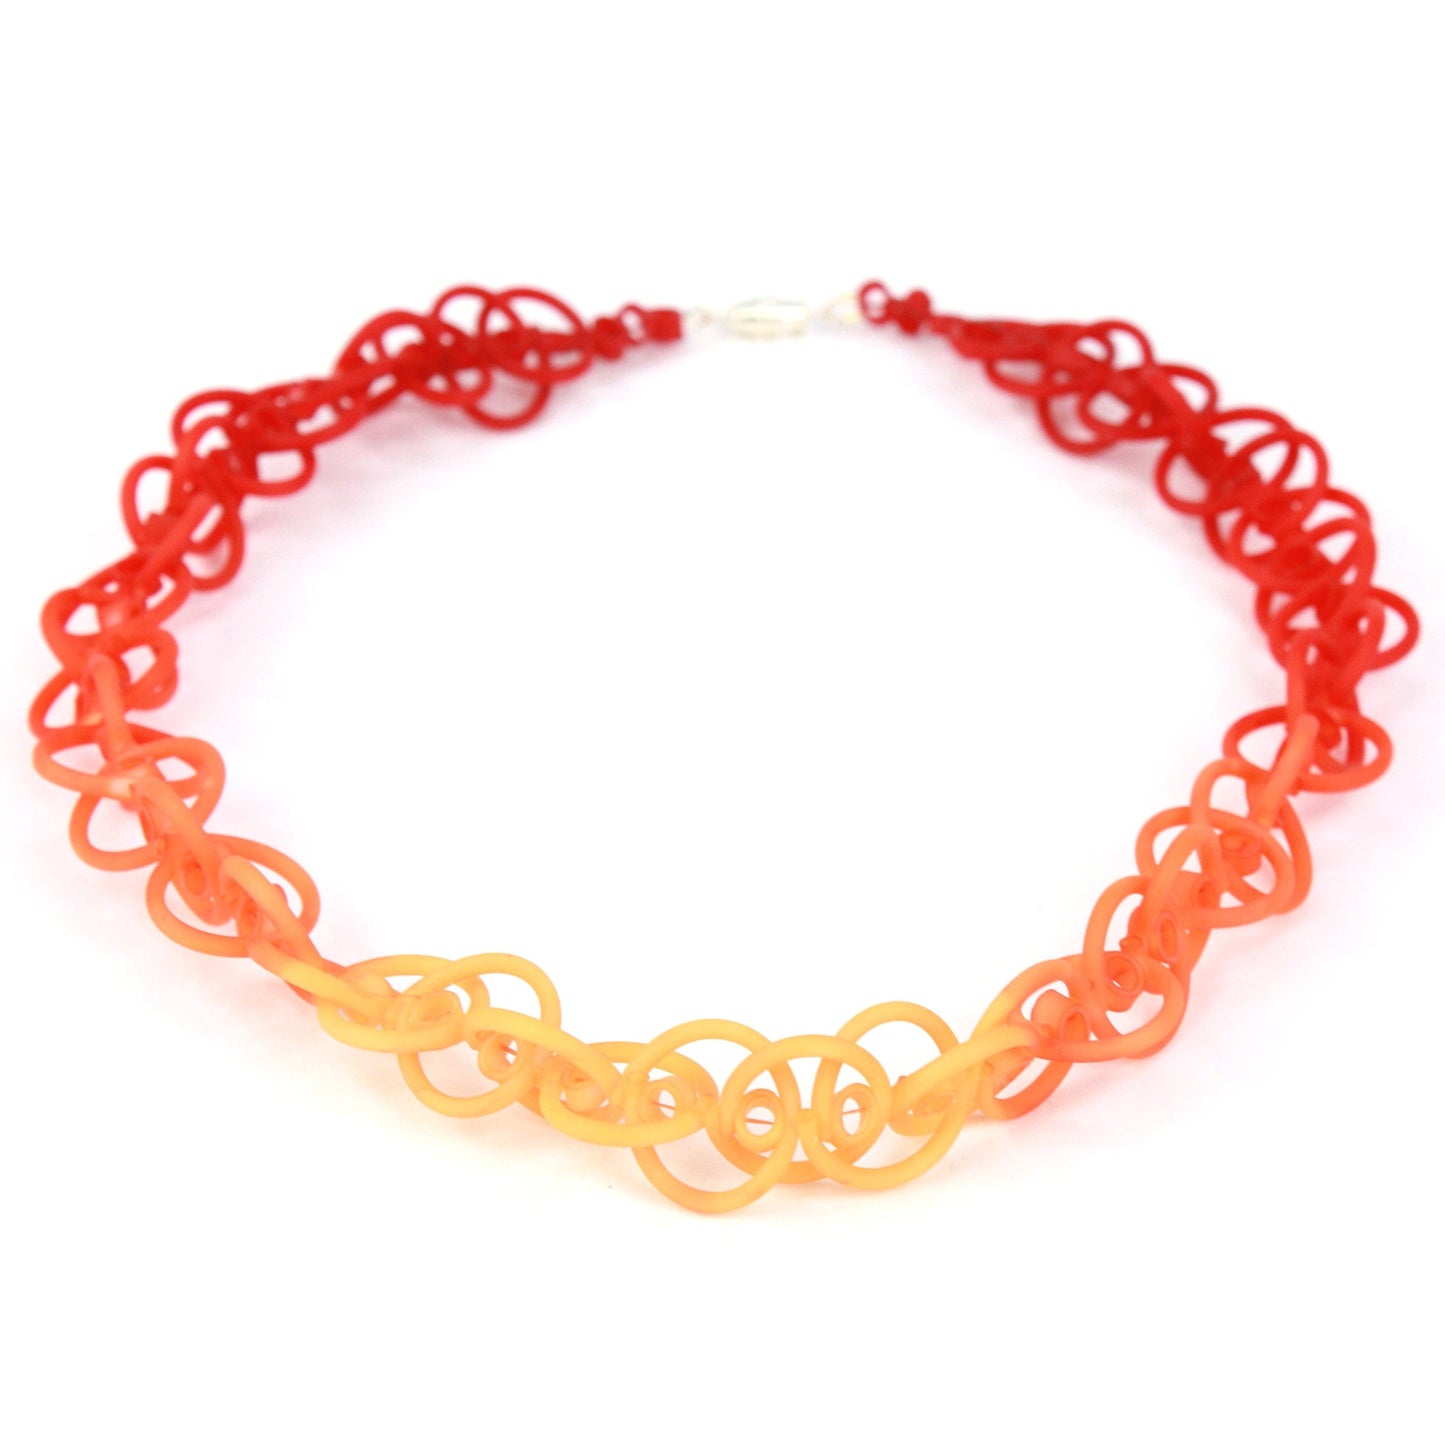 Short chain necklace - Red, orange and yellow